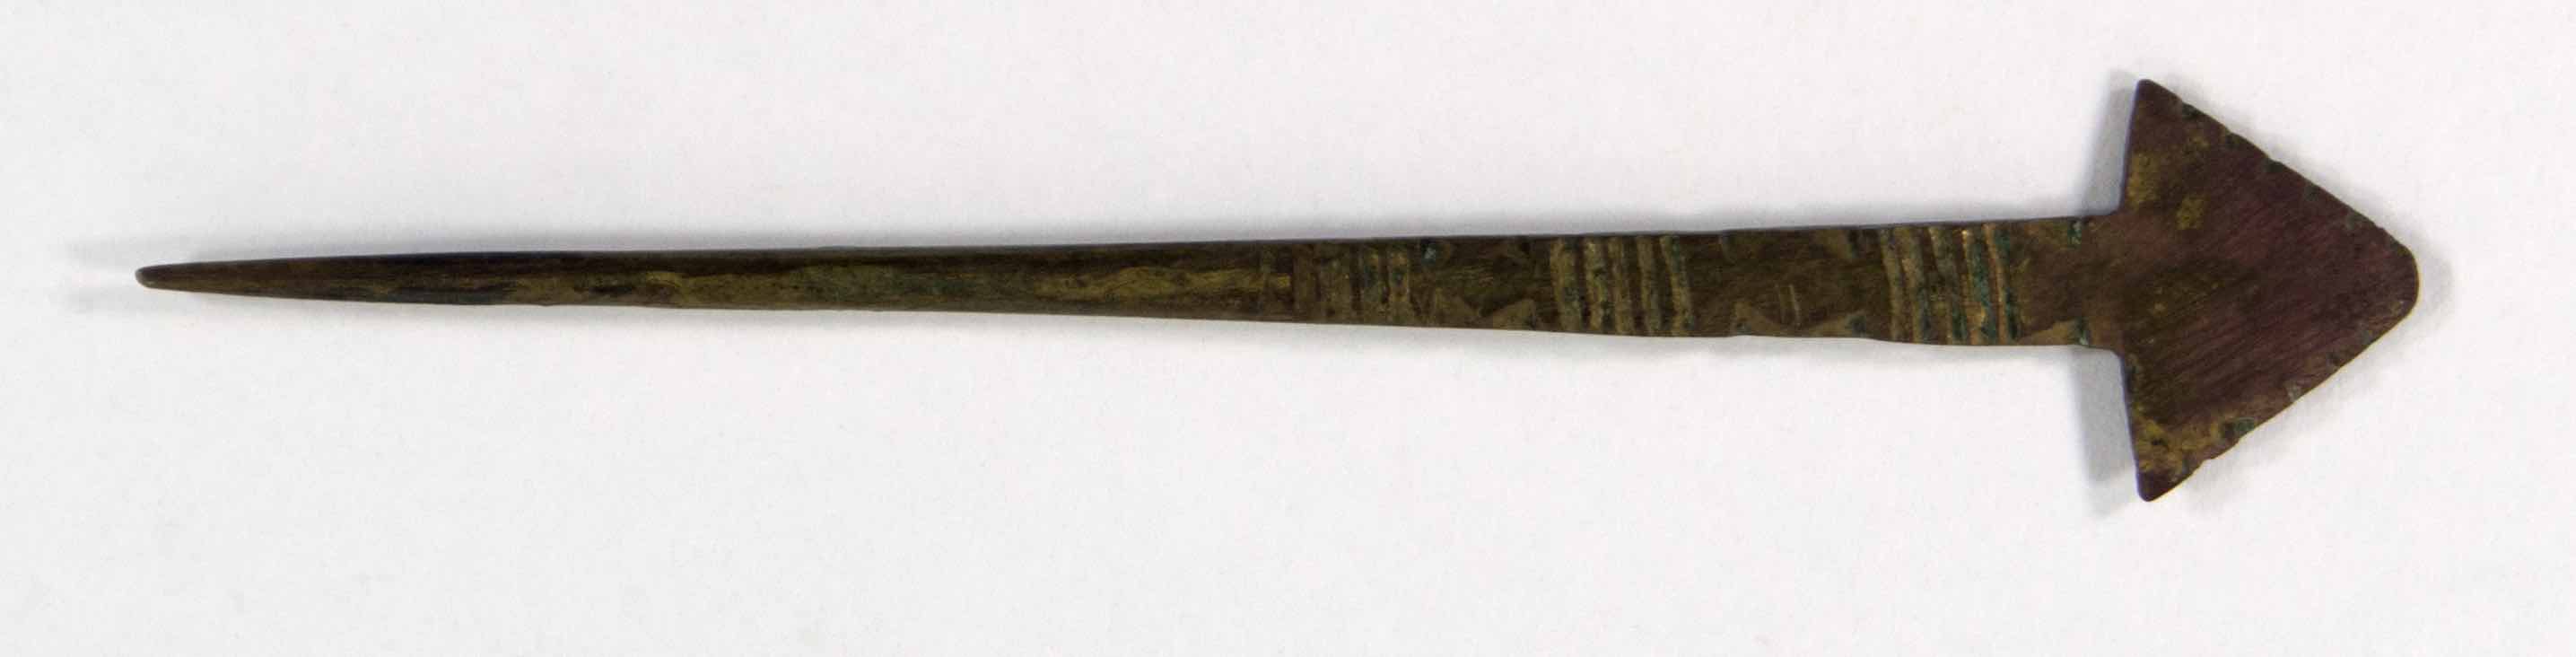 Brass hair pin with round cross section flattening towards a triangular head.